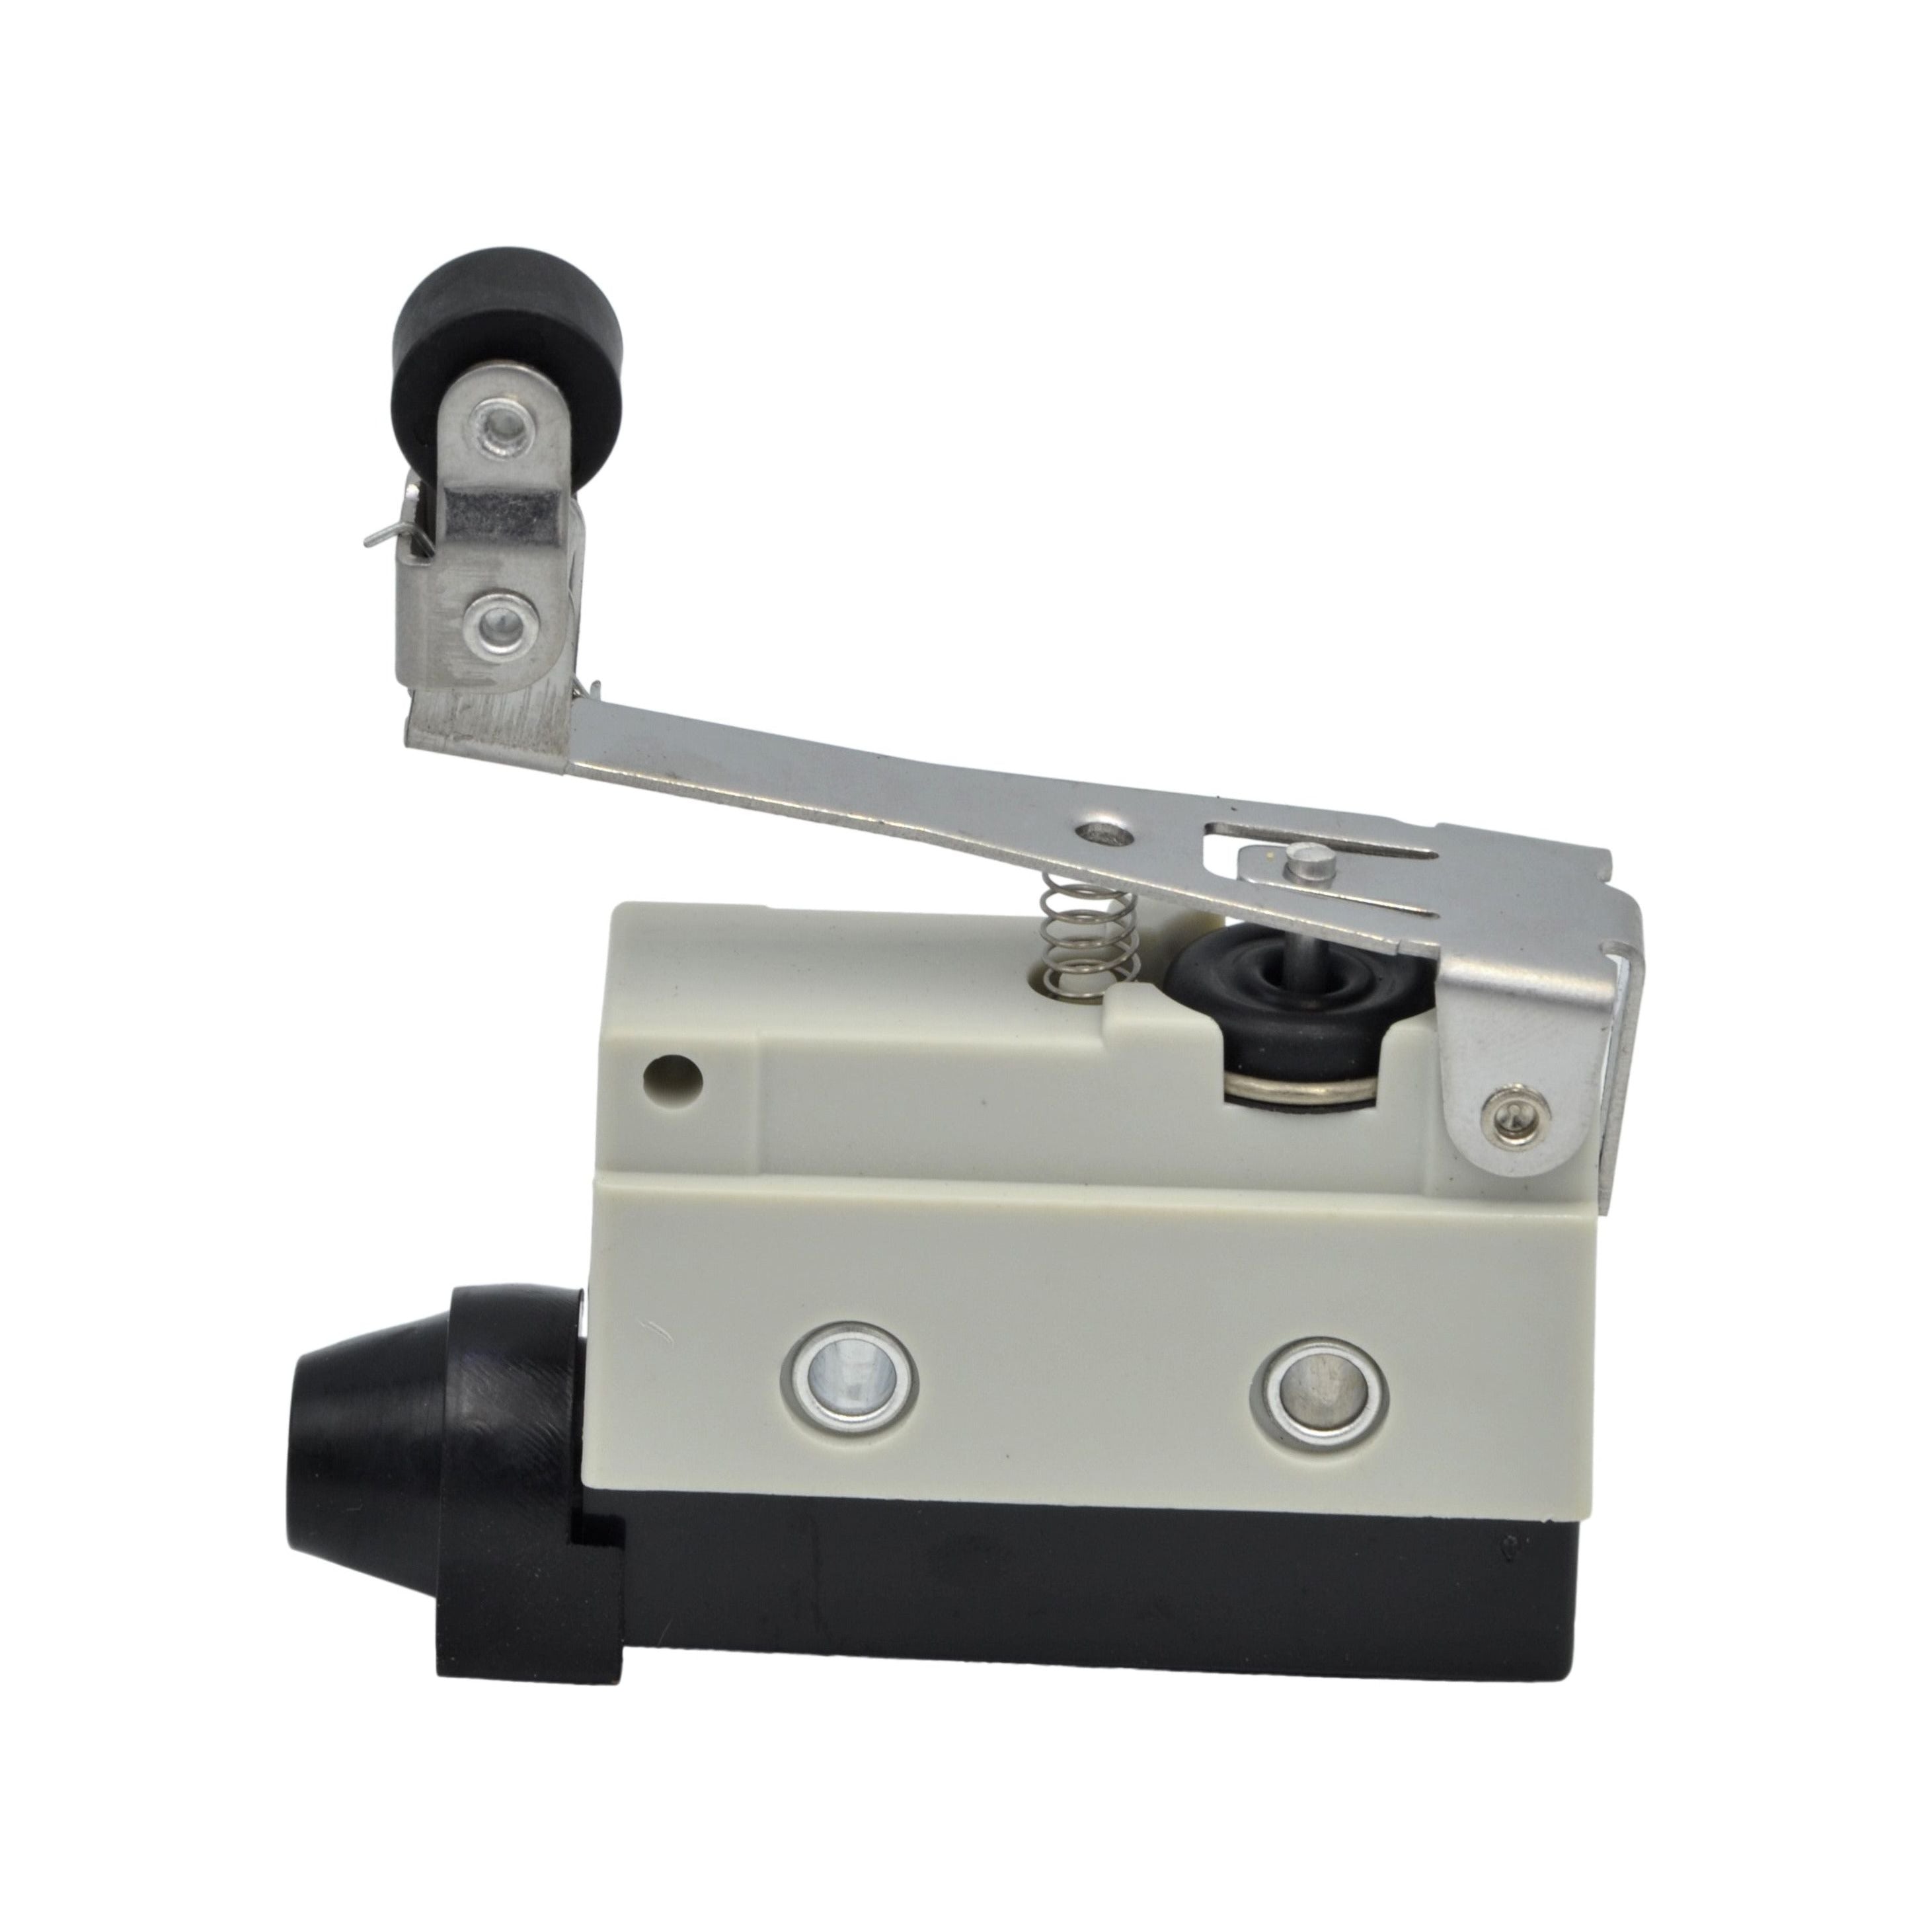 AZ-7124 Angled Lever with Roller Limit Switch